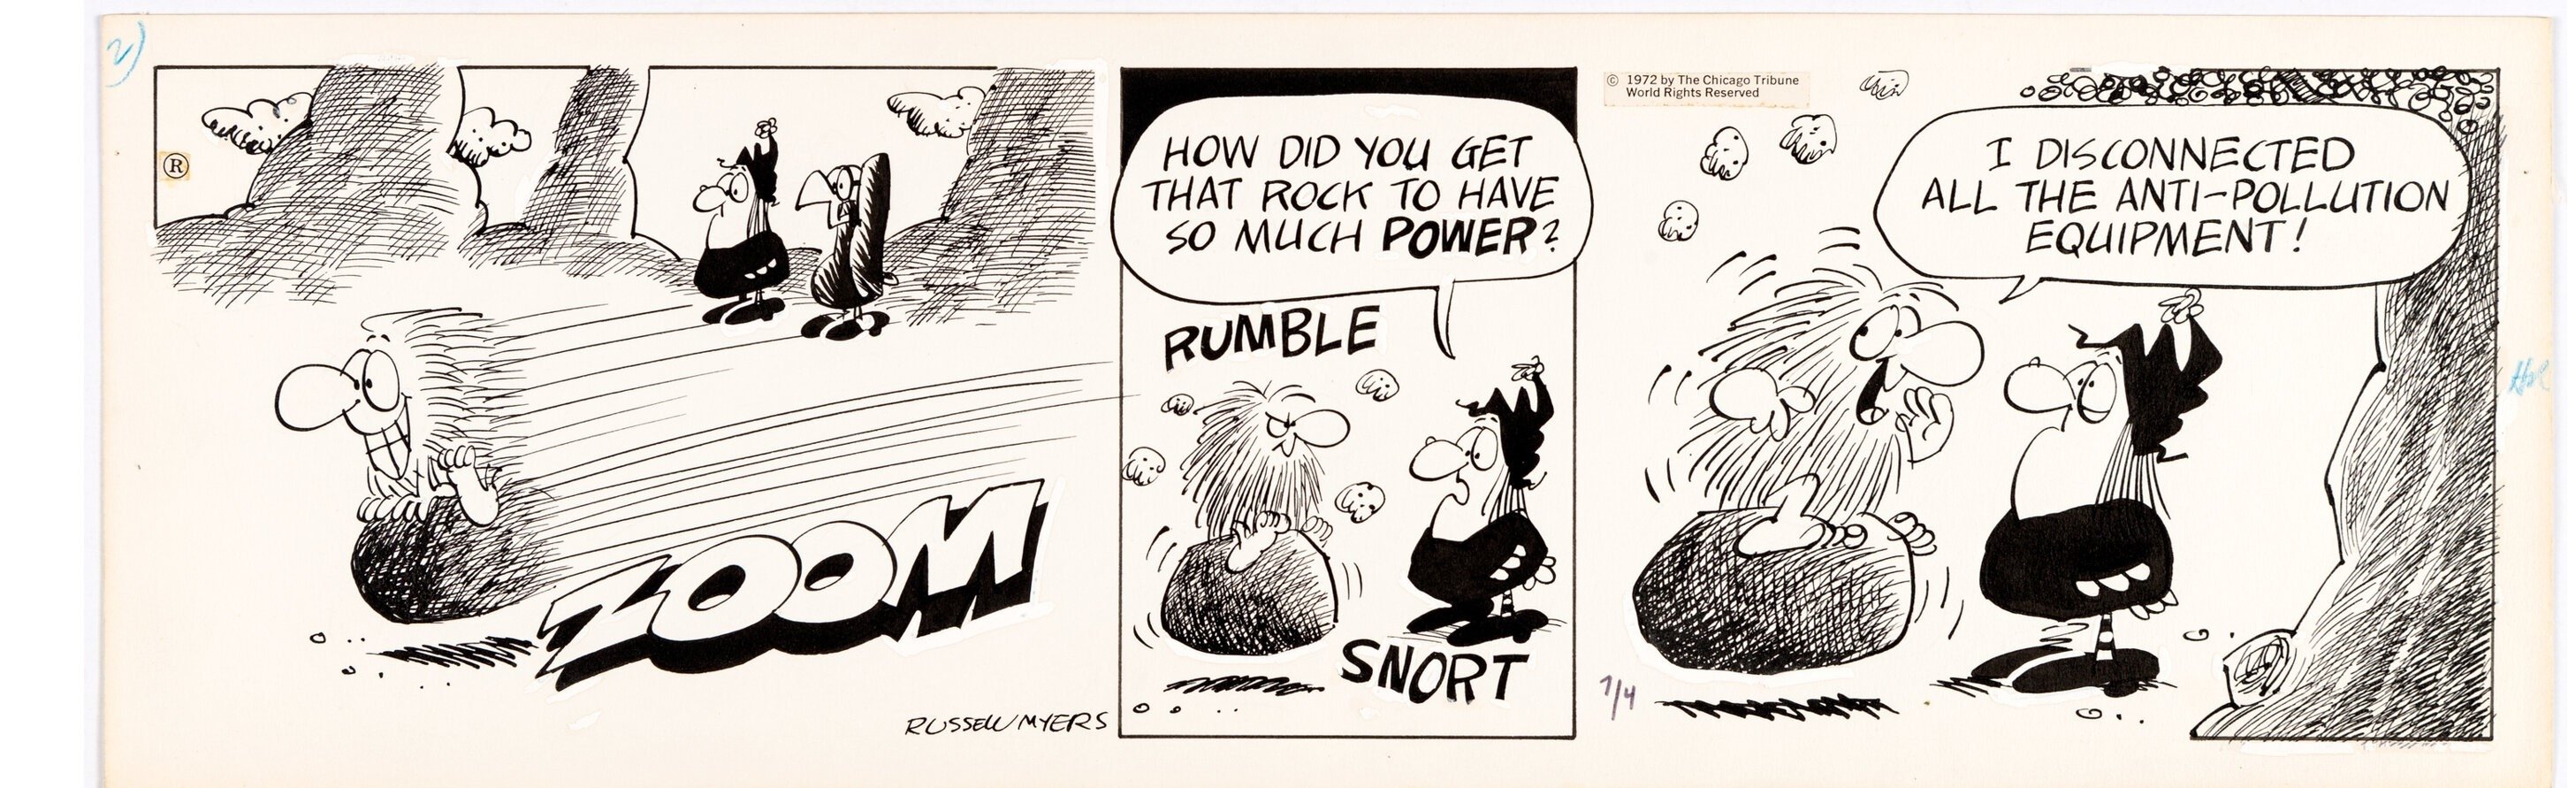 Broom Hilda Daily Comic Strip 7 4 72 In Wayne Mousseaus Russell Myers